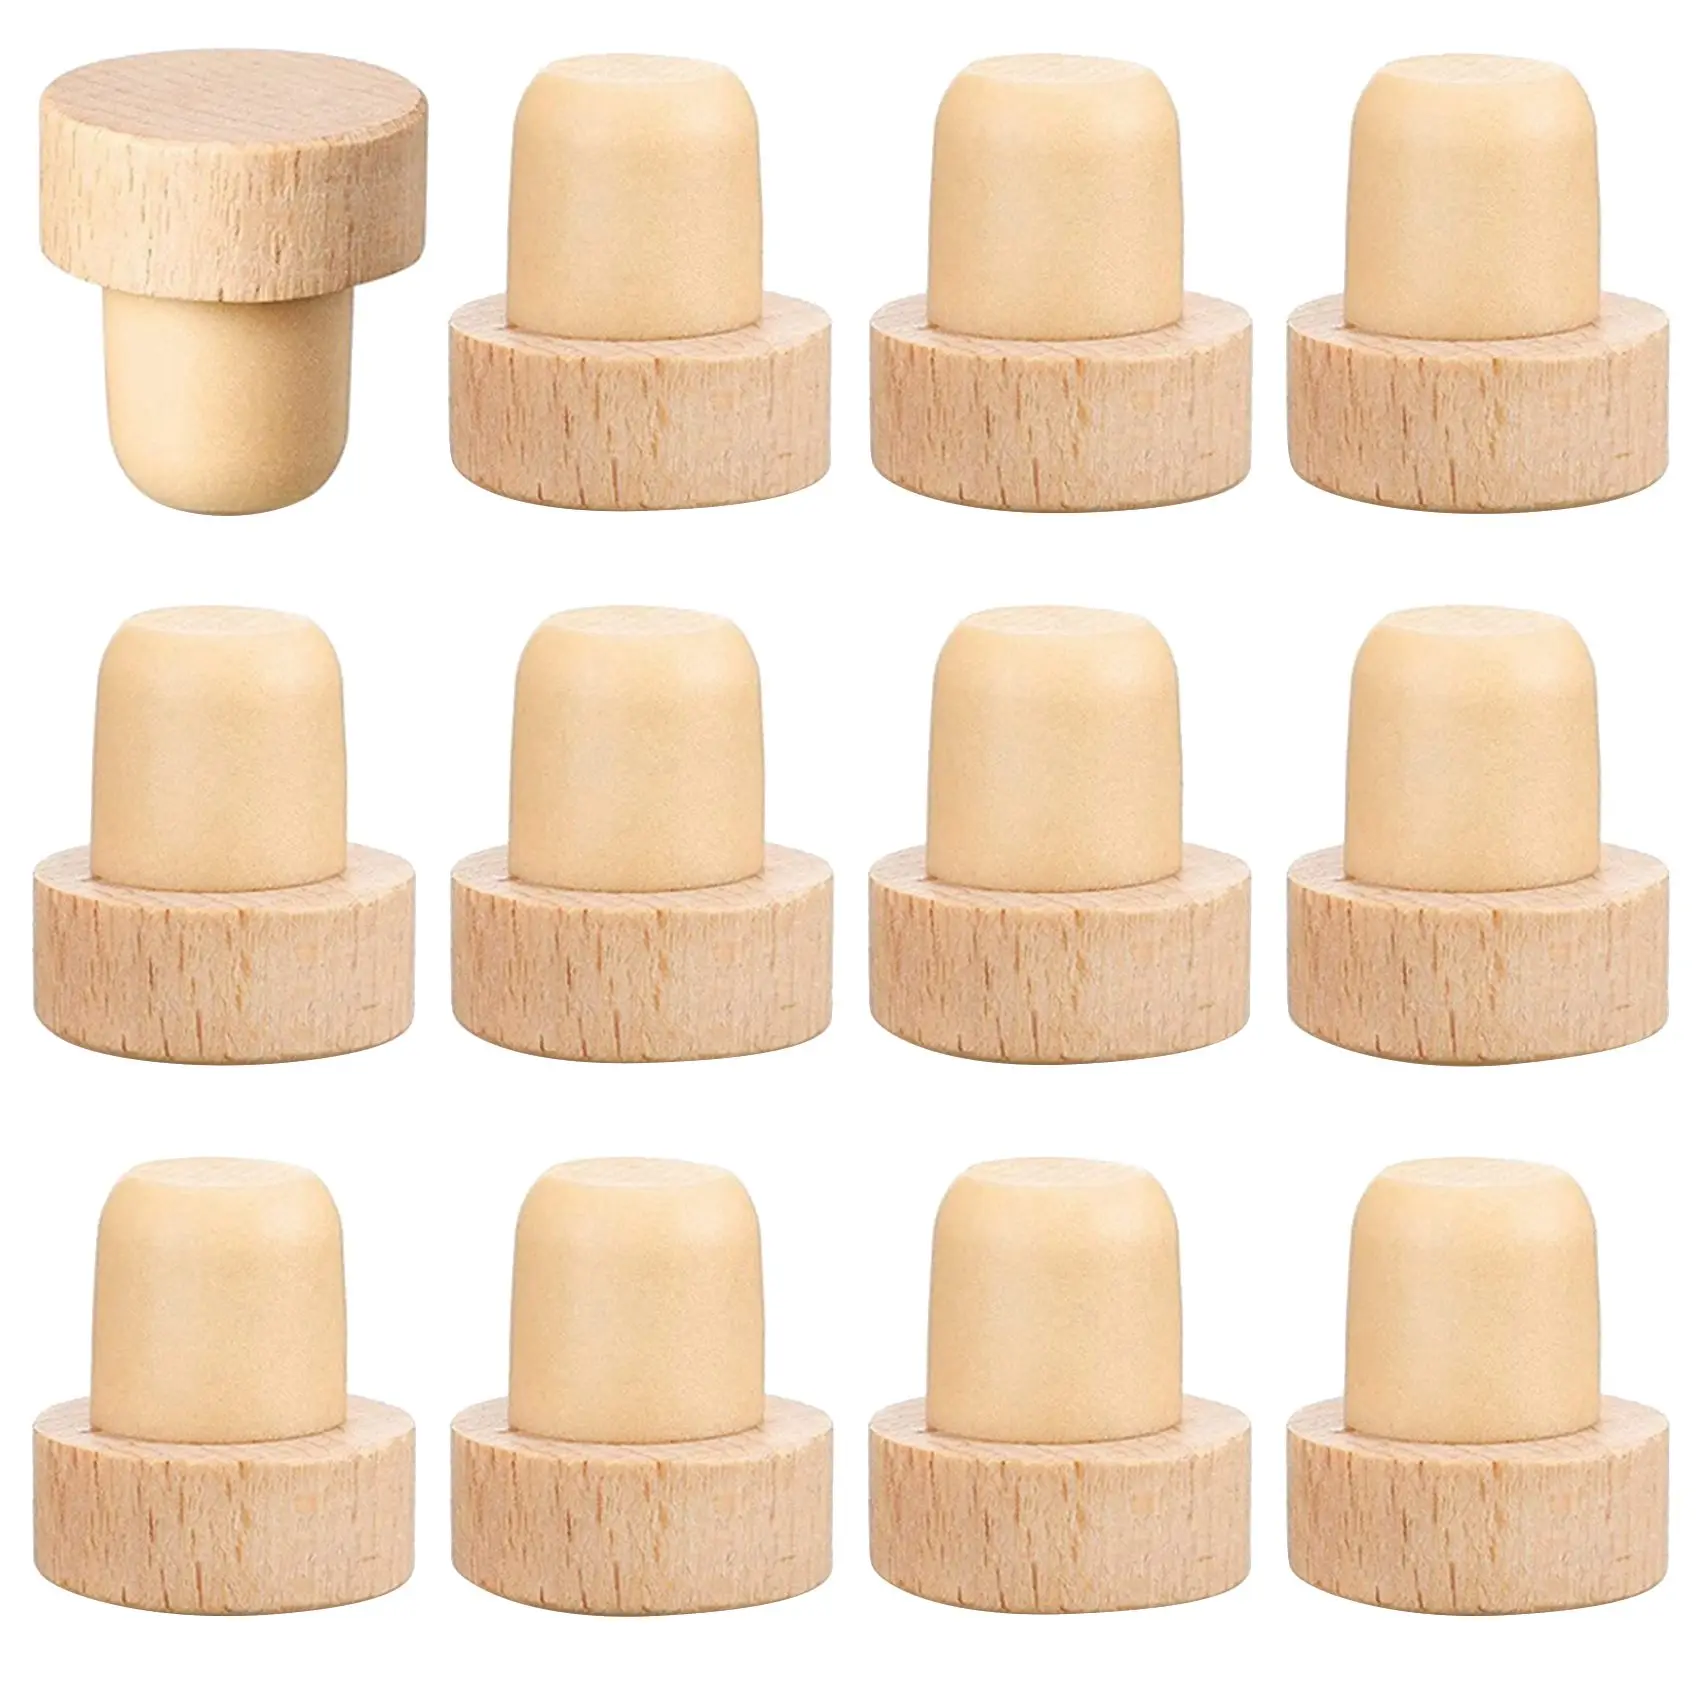 

Wine Bottle Corks T Shaped Cork Plugs for Wine Cork Wine Stopper Reusable Wine Corks Wooden and Rubber (12 Pieces)